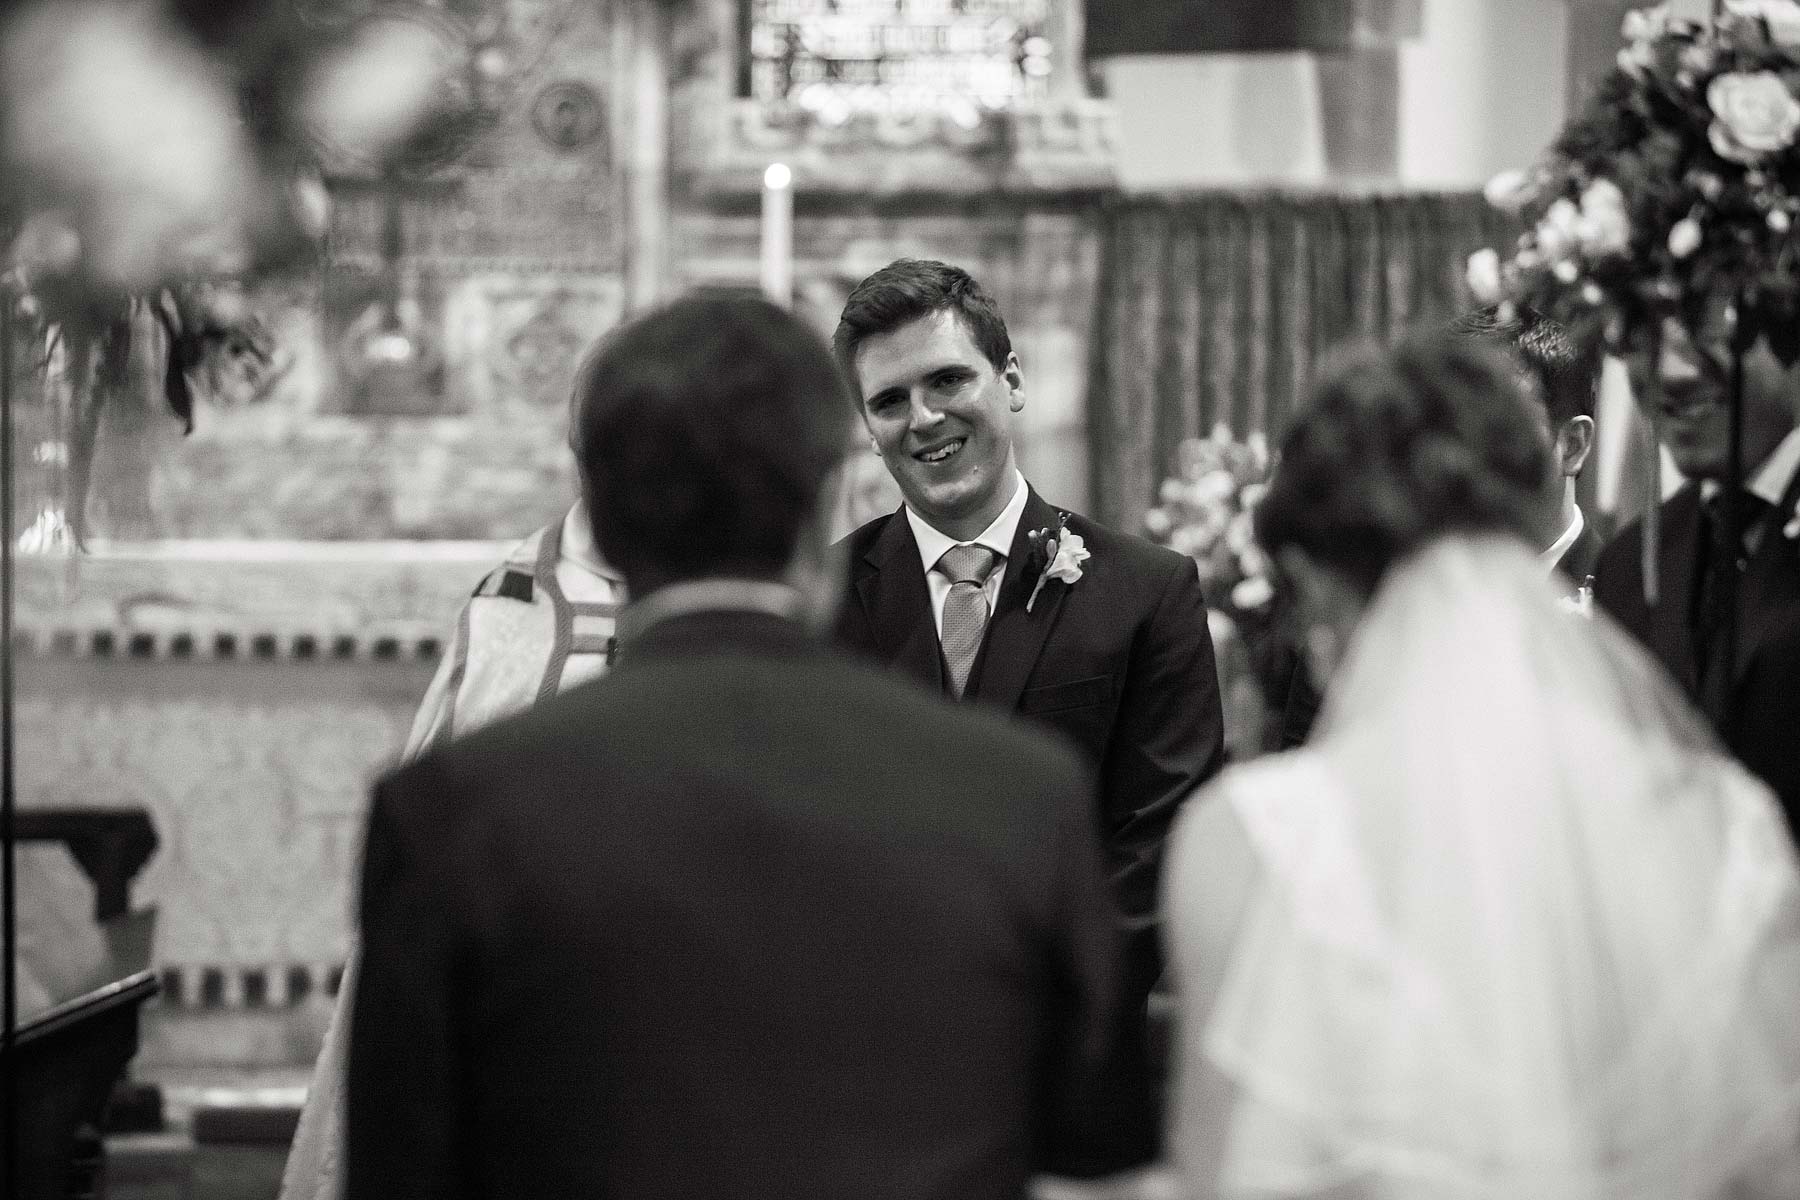 Reportage photographs capture the emotion on the grooms face as his bride walks down the aisle at St Chads Church in Pattingham by Pattingham Wedding Photographer Stuart James